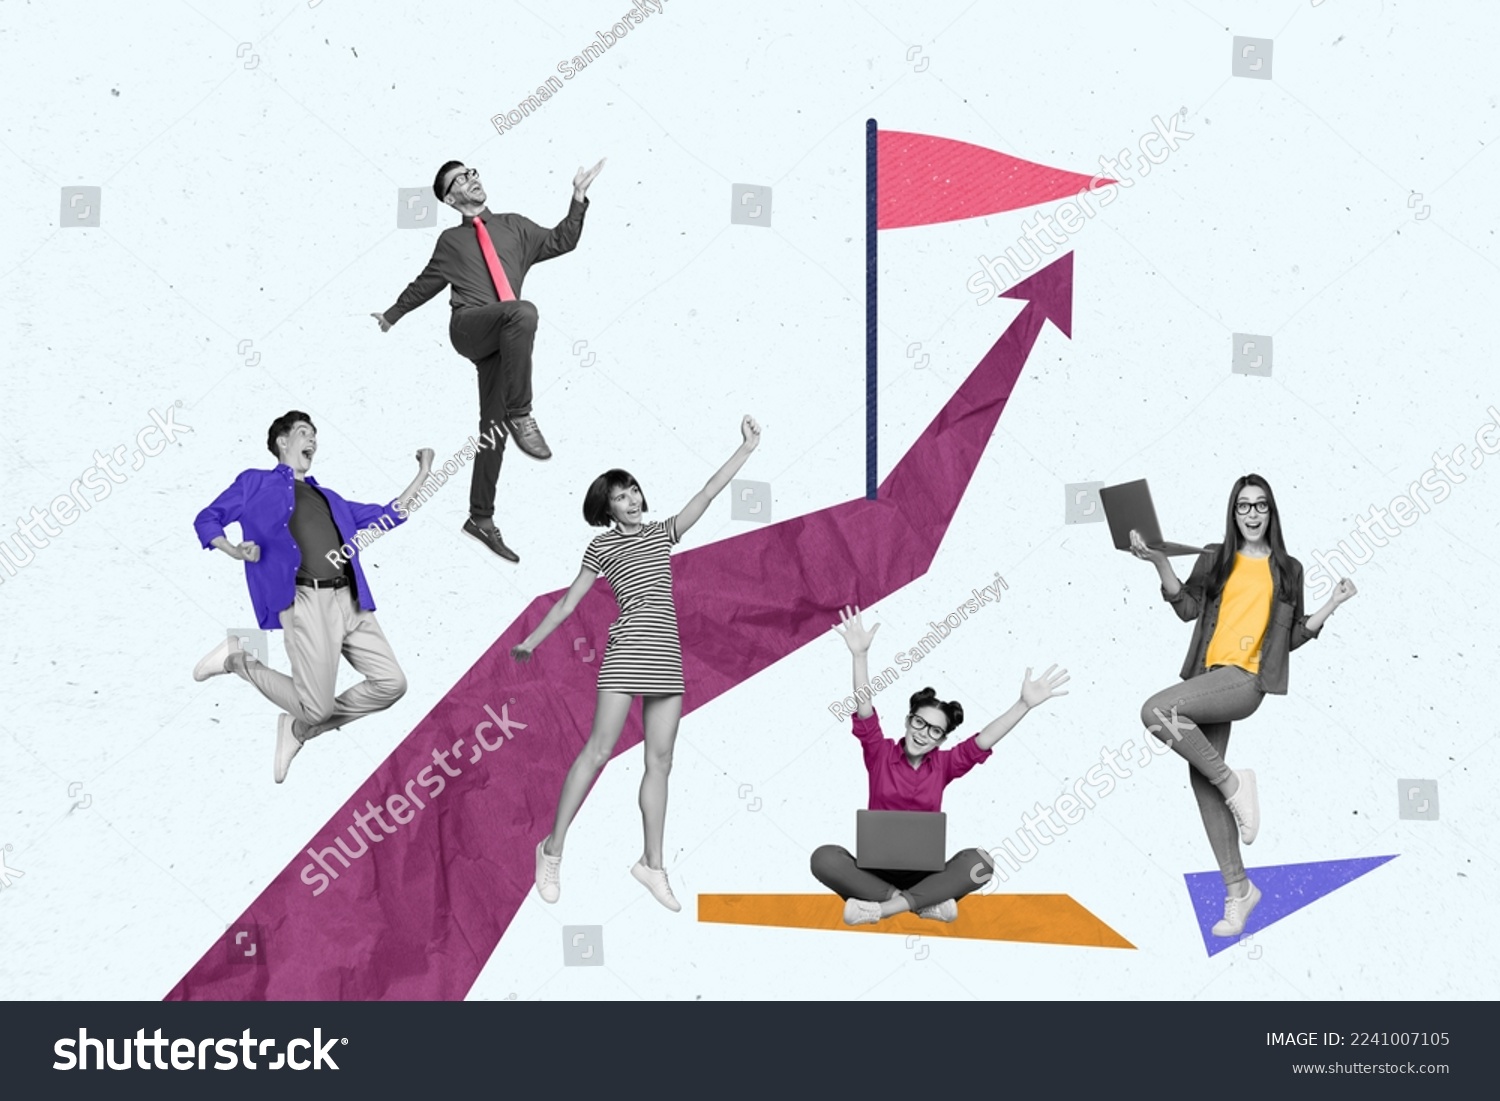 Creative photo 3d collage artwork poster postcard picture of many happy people celebrating success isolated on painting background #2241007105